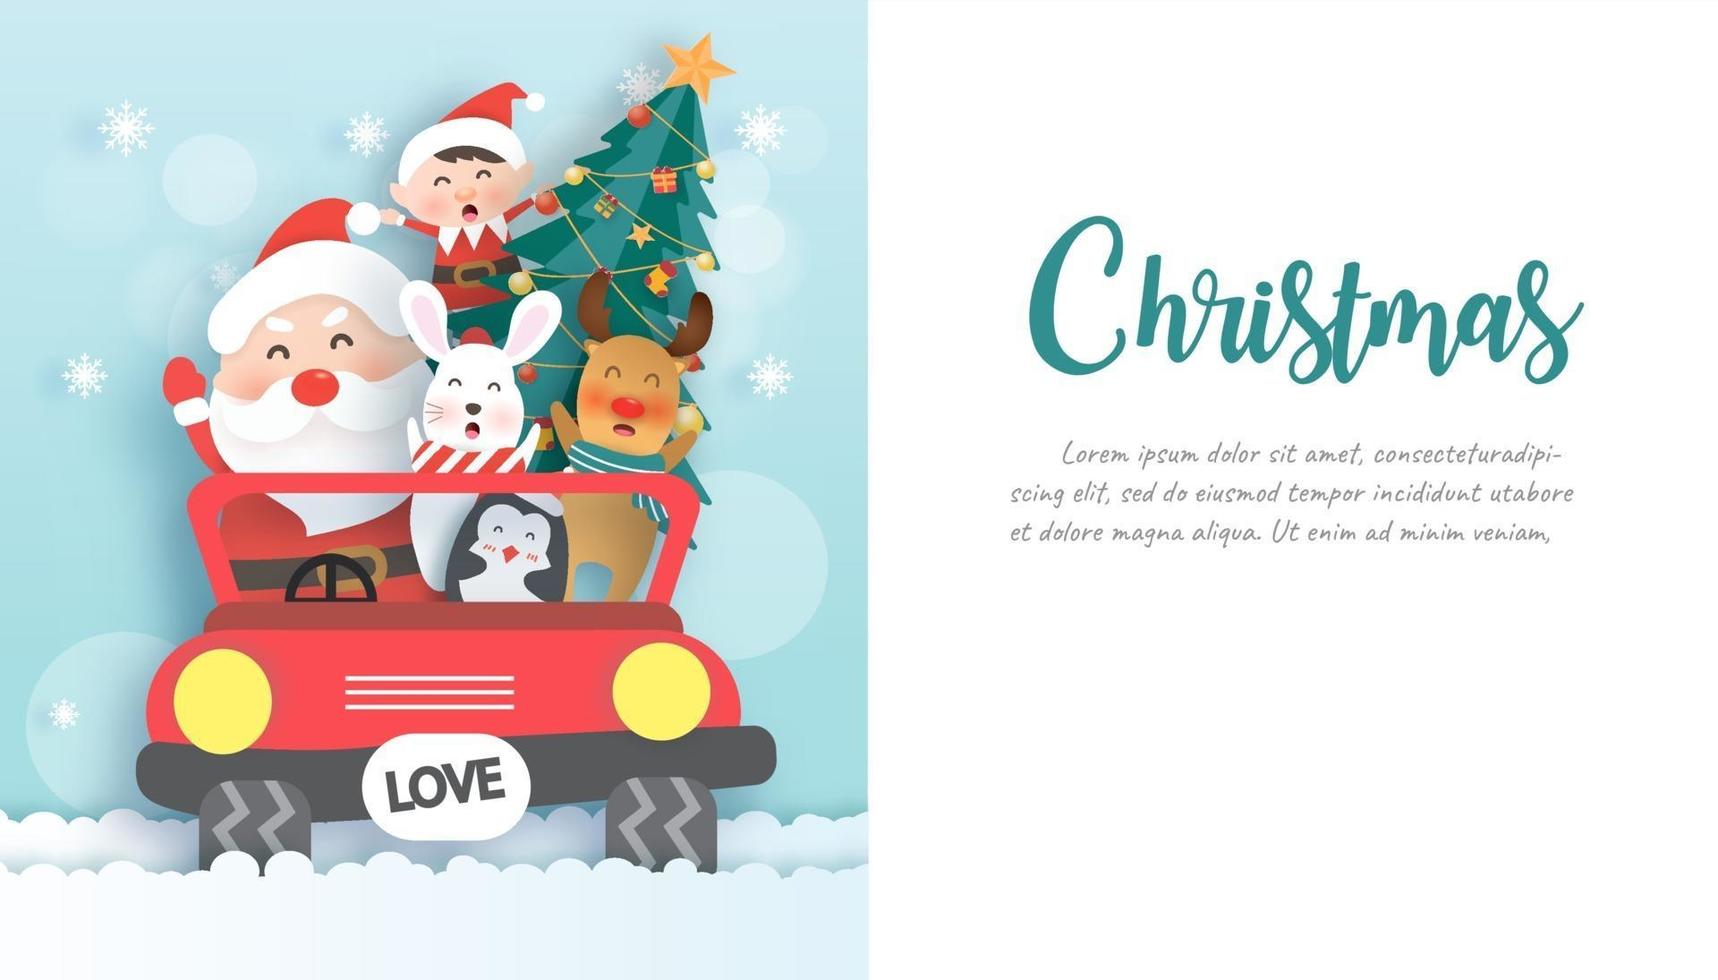 Christmas banner with a cute Santa clause and friends. vector